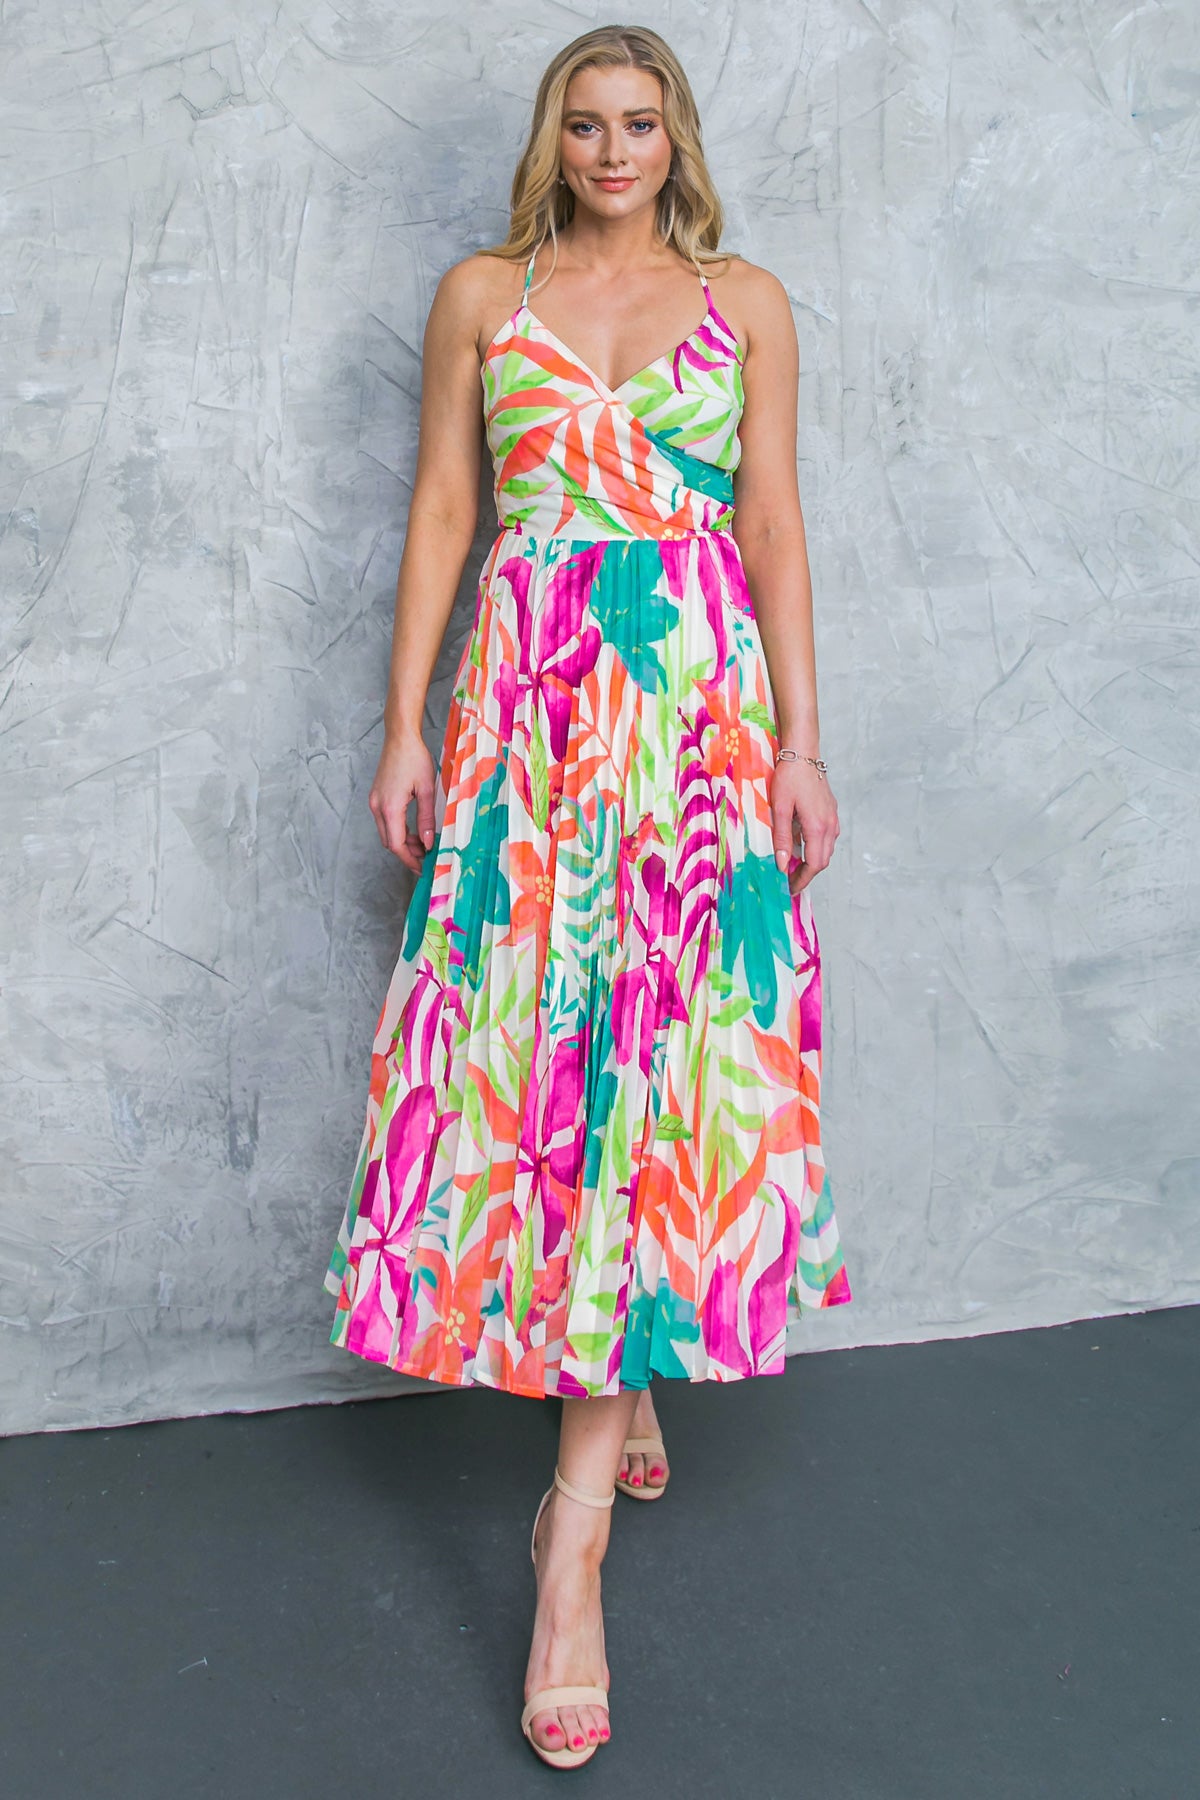 SEE THE CITY FLORAL WOVEN MIDI DRESS